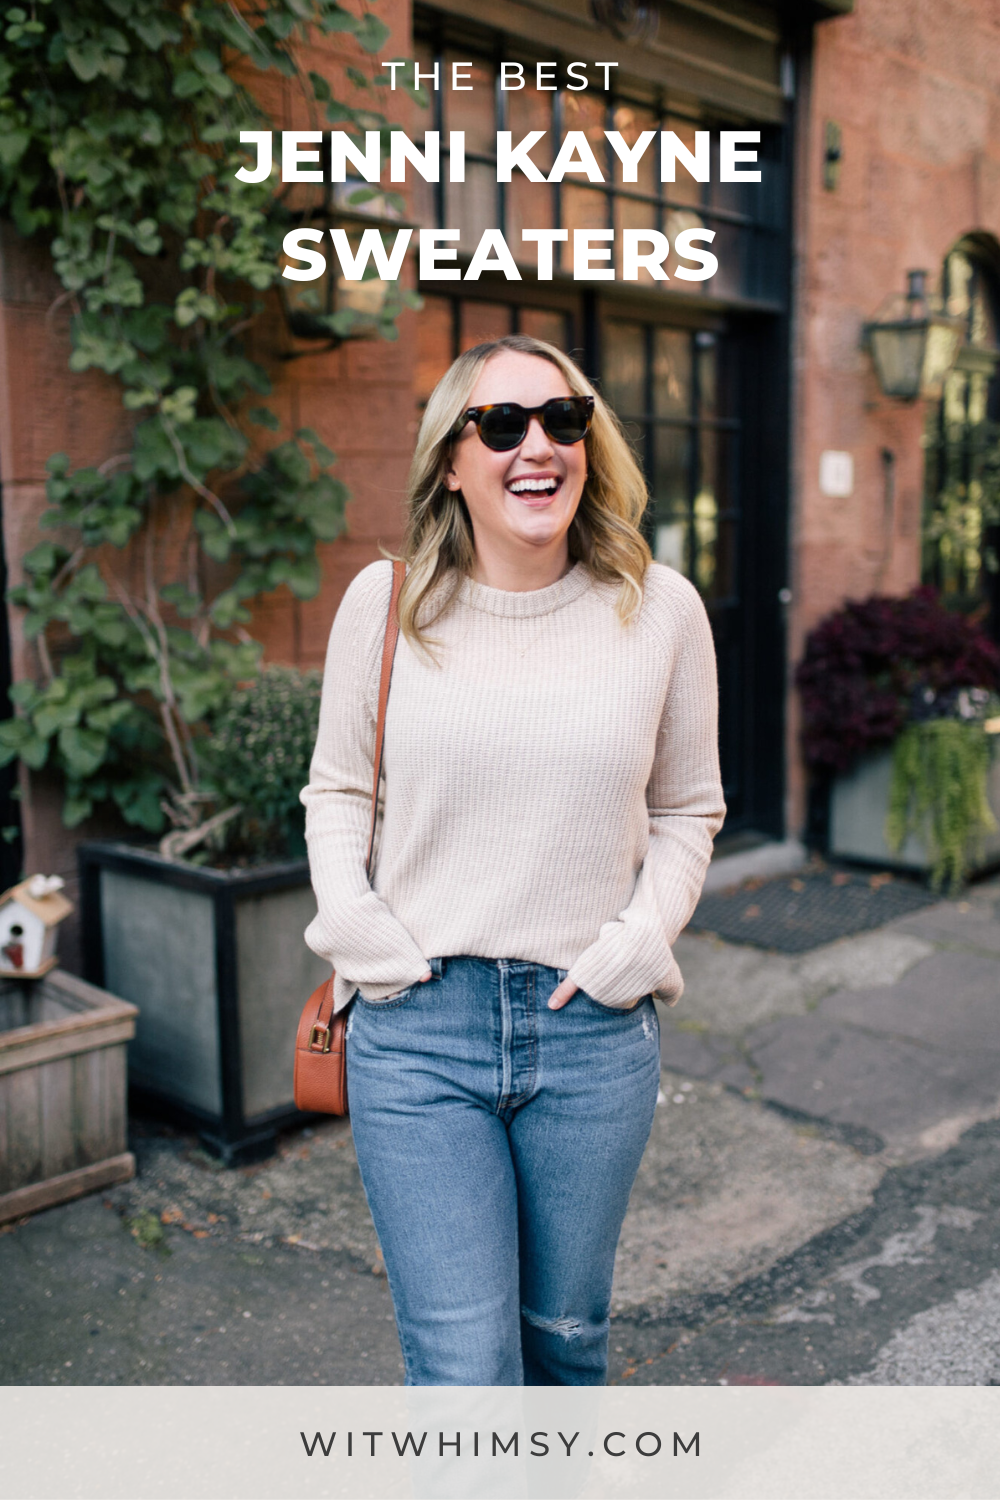 The Best Jenni Kayne Sweaters | wit & whimsy